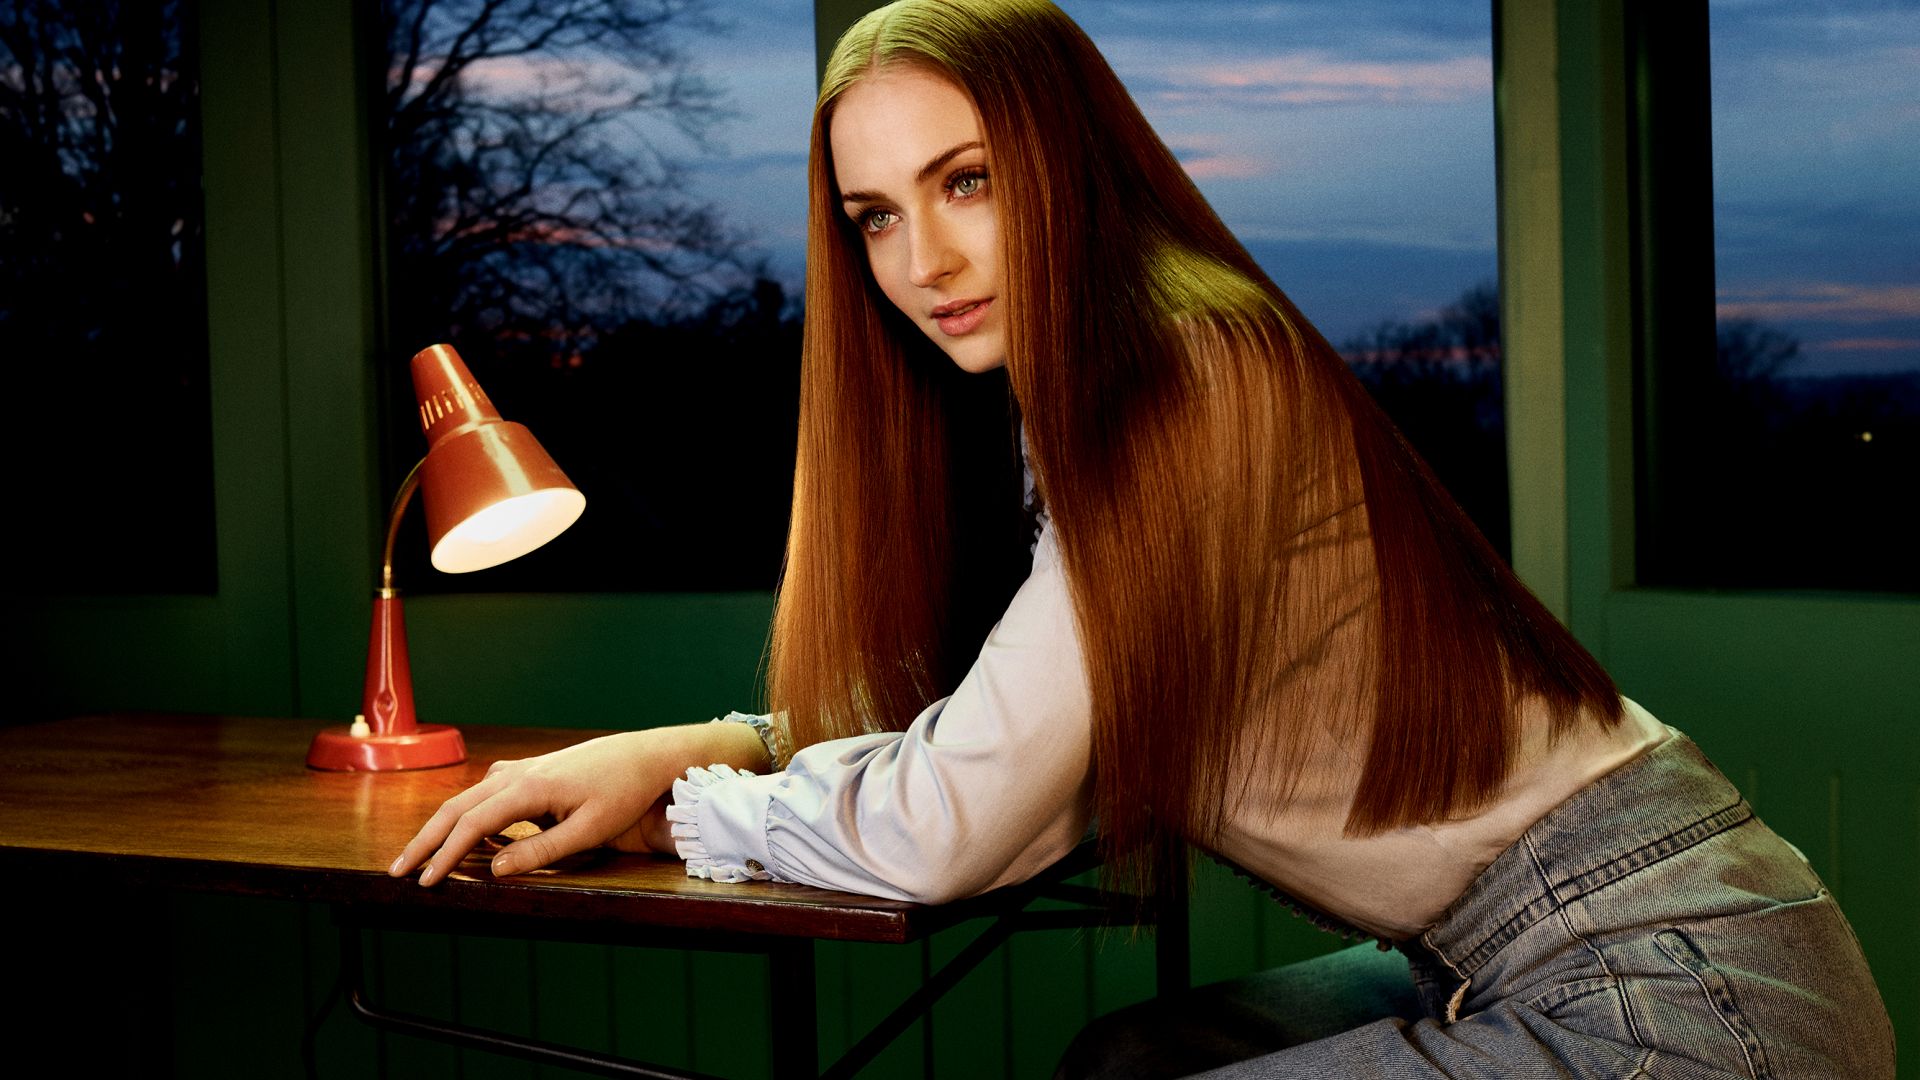 Wallpaper Sophie Turner, red head, actress, table lamp